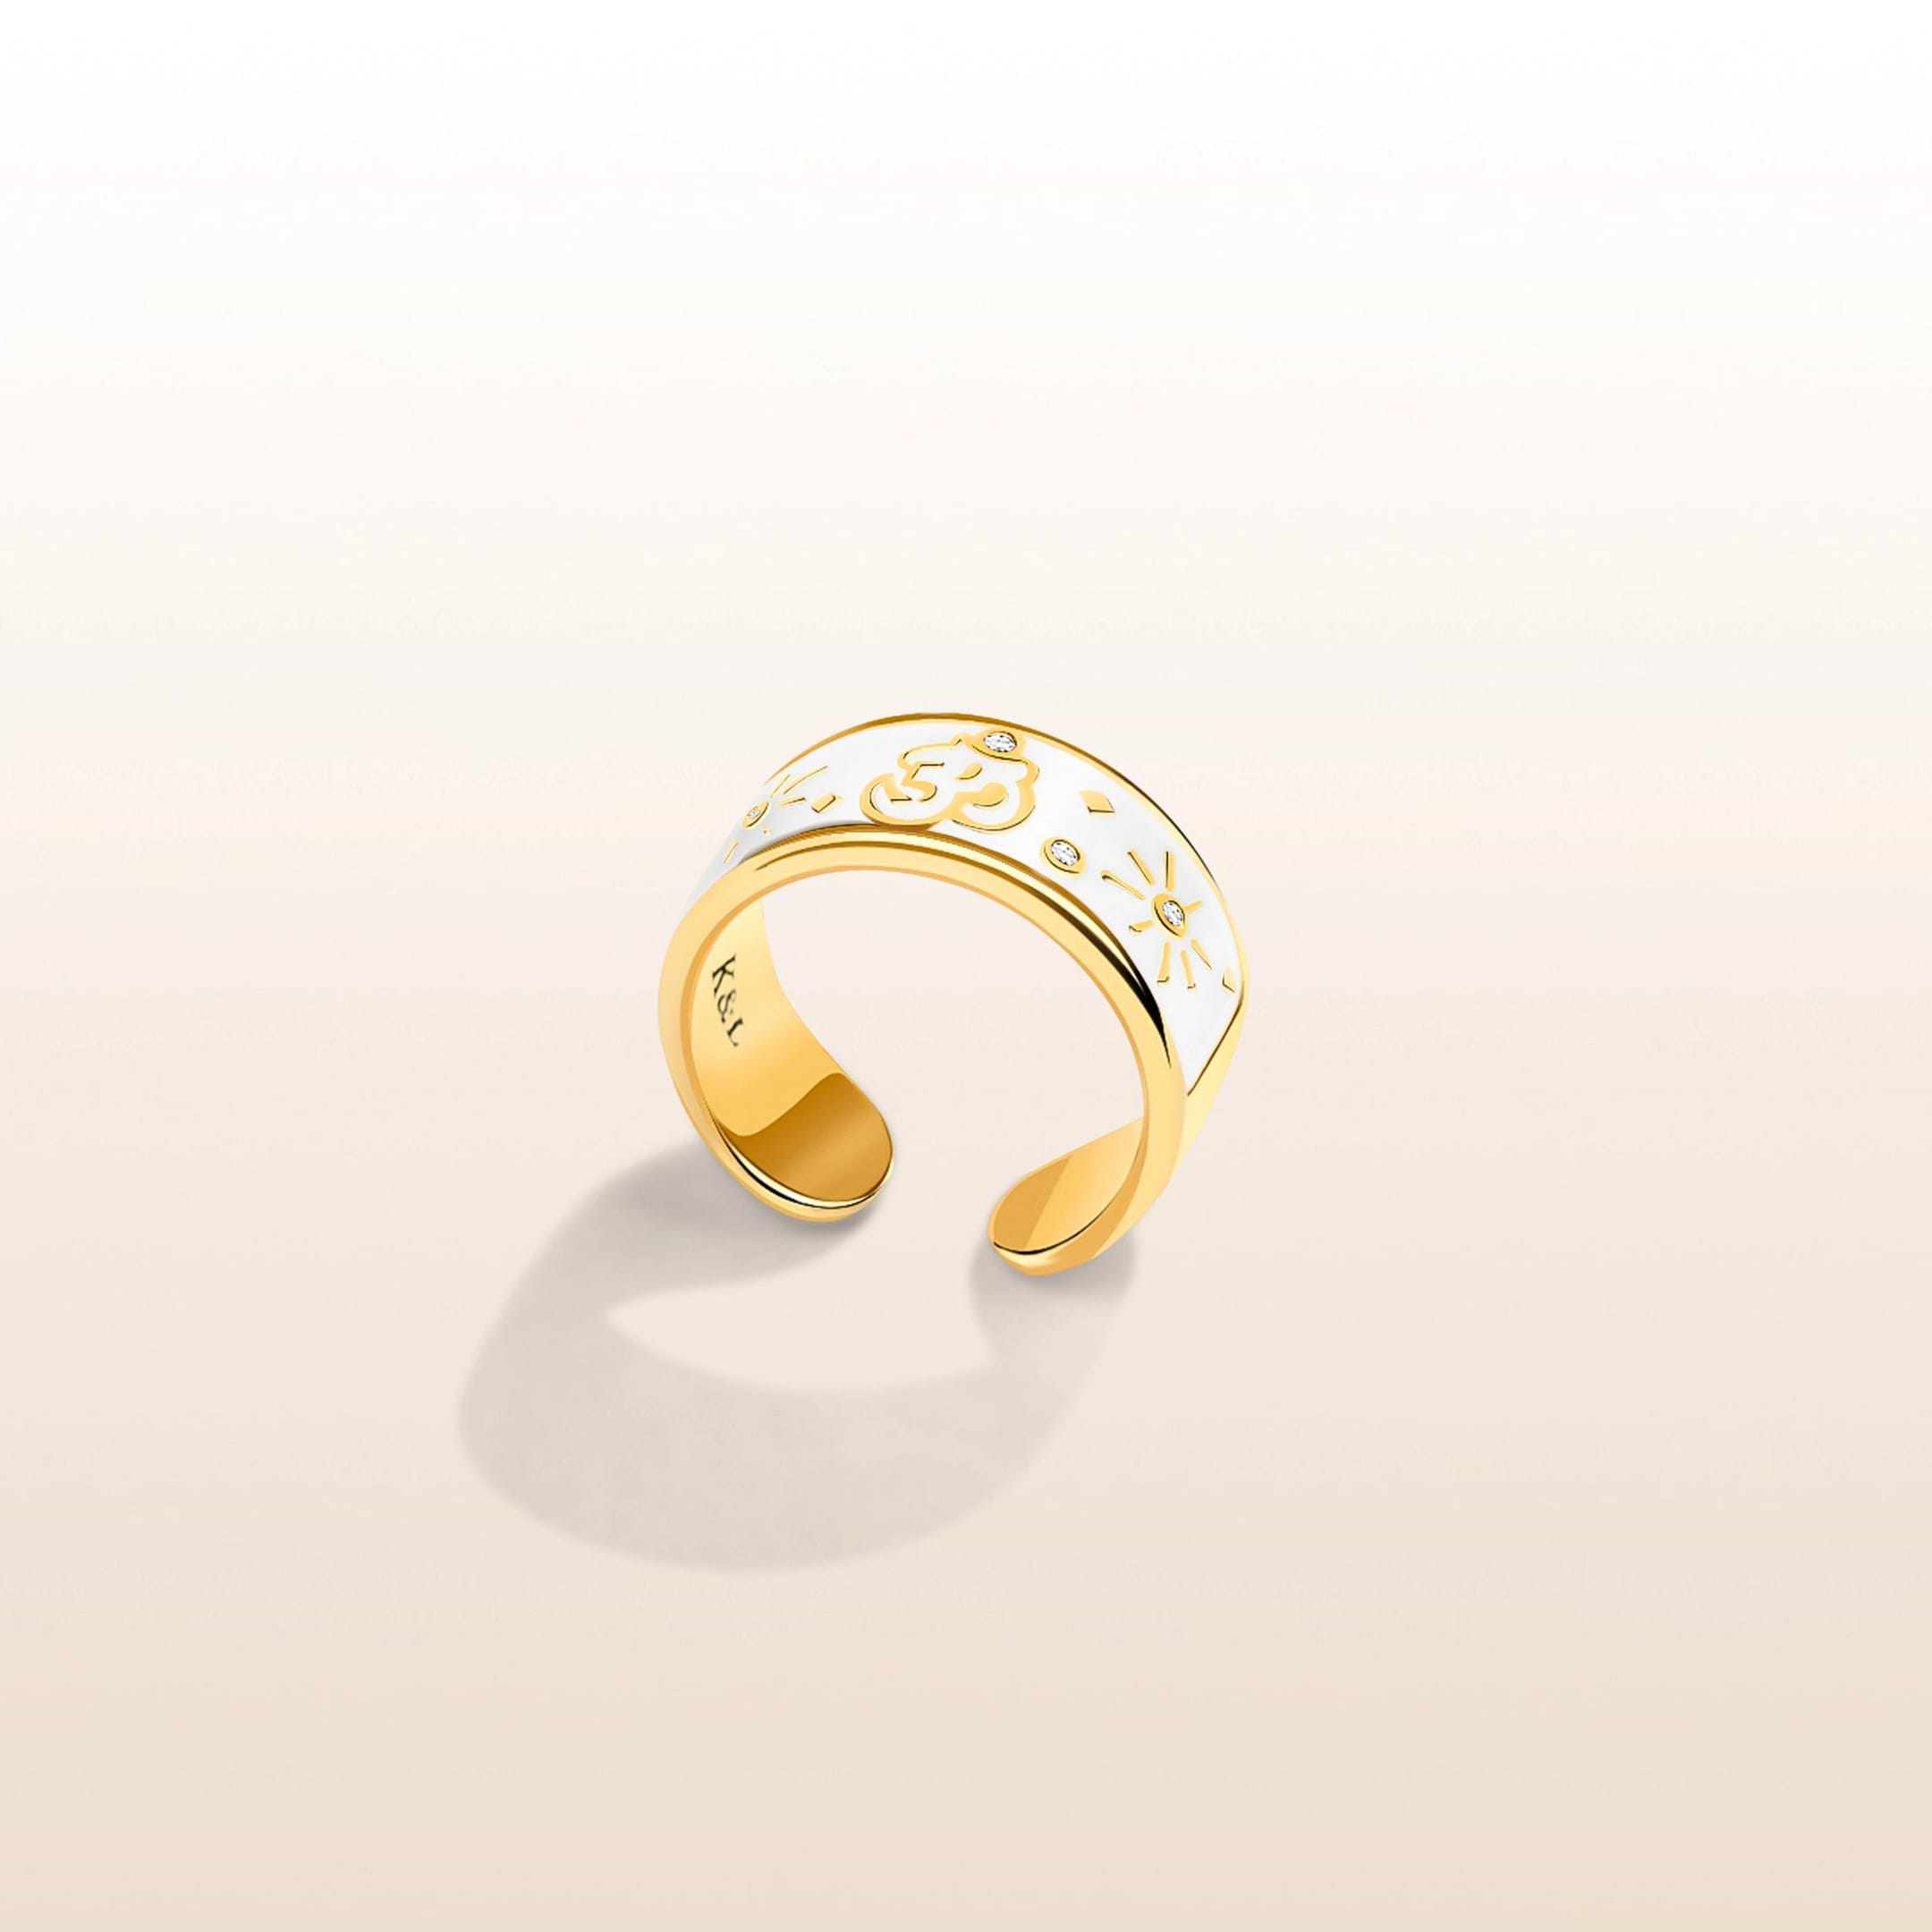 Picture of Steadfast Serenity - Om & Diamond Ring